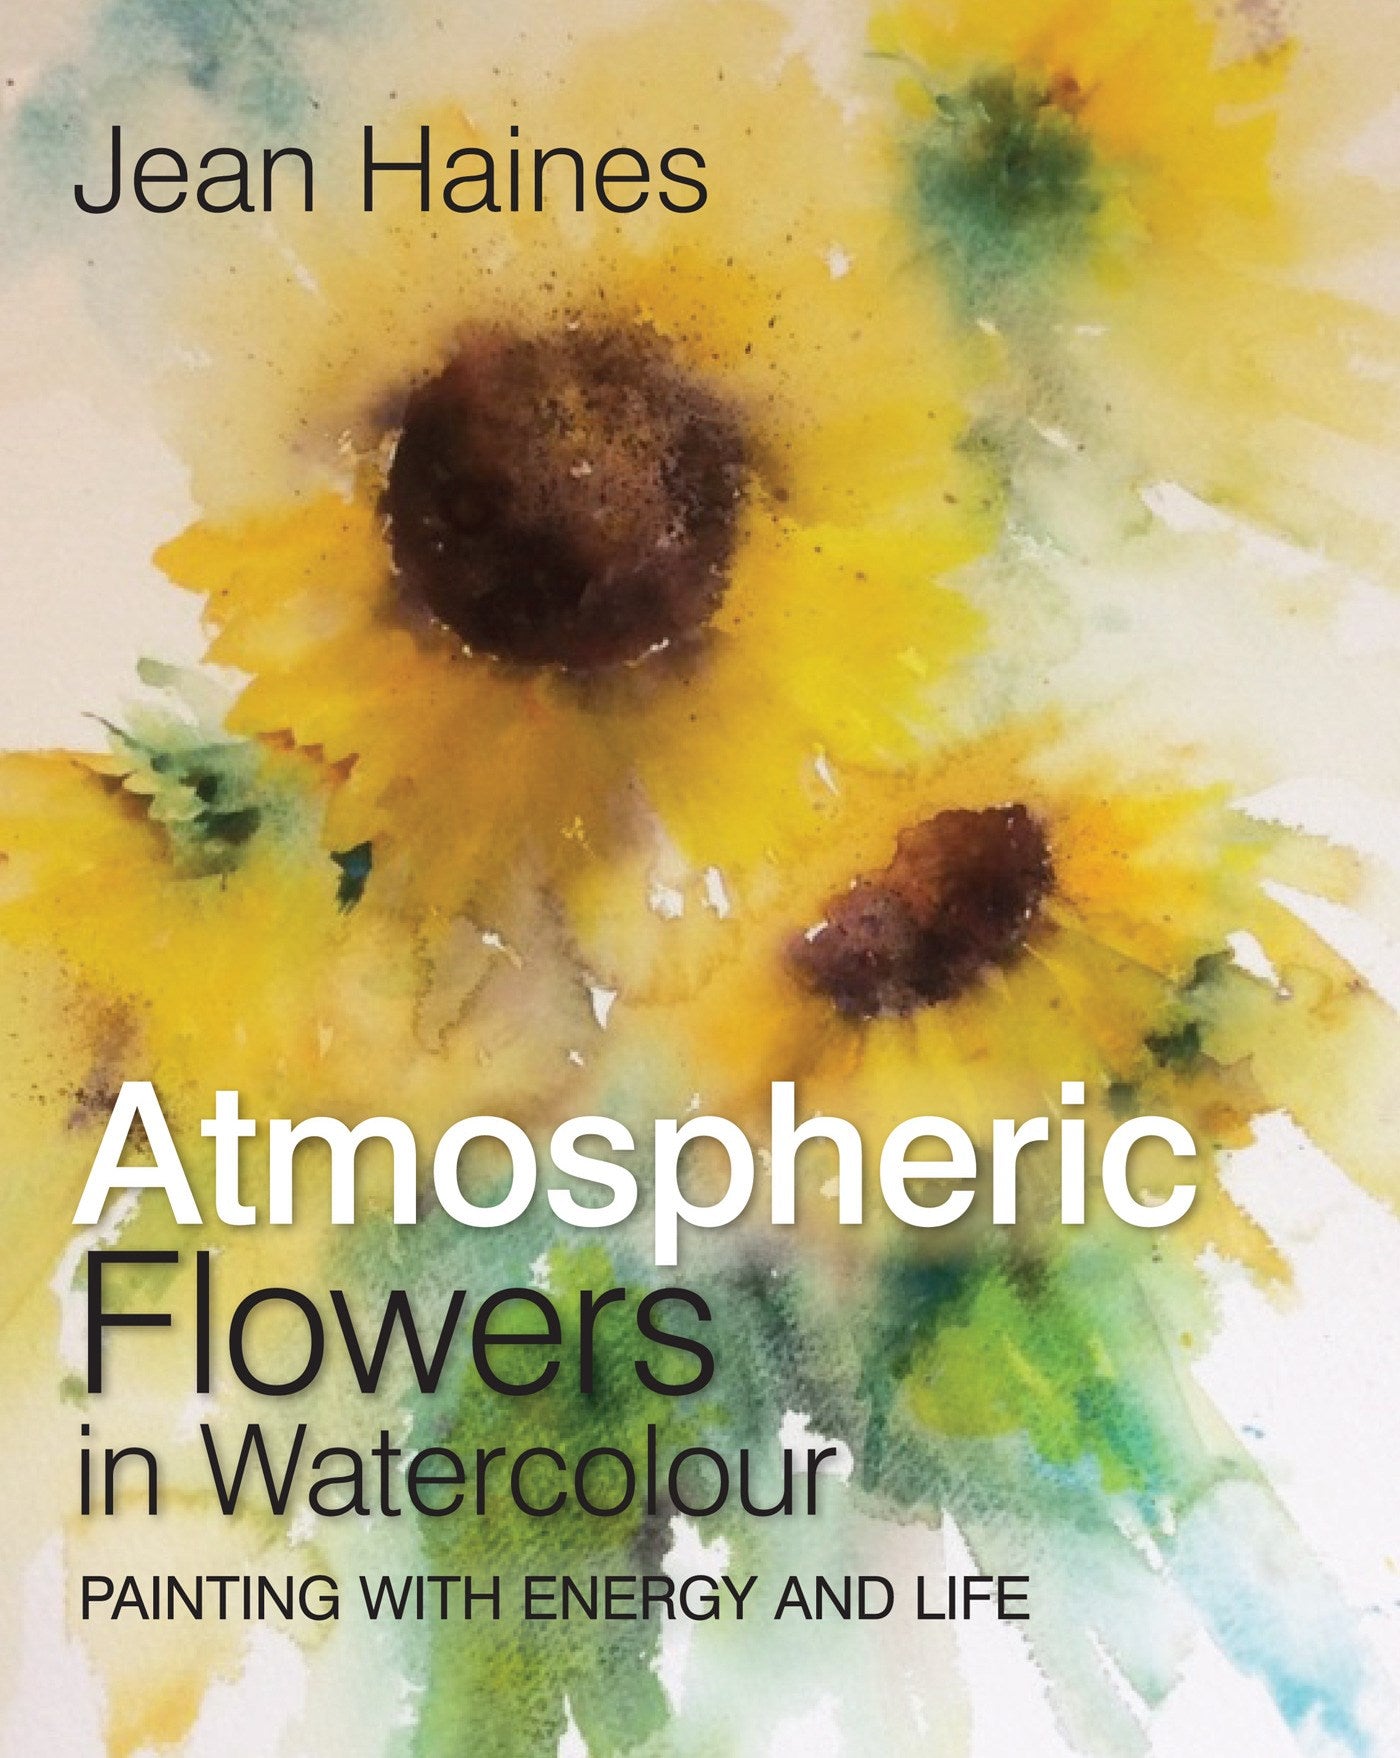 Jean Haines' Atmospheric Flowers in Watercolour: Painting with energy and life